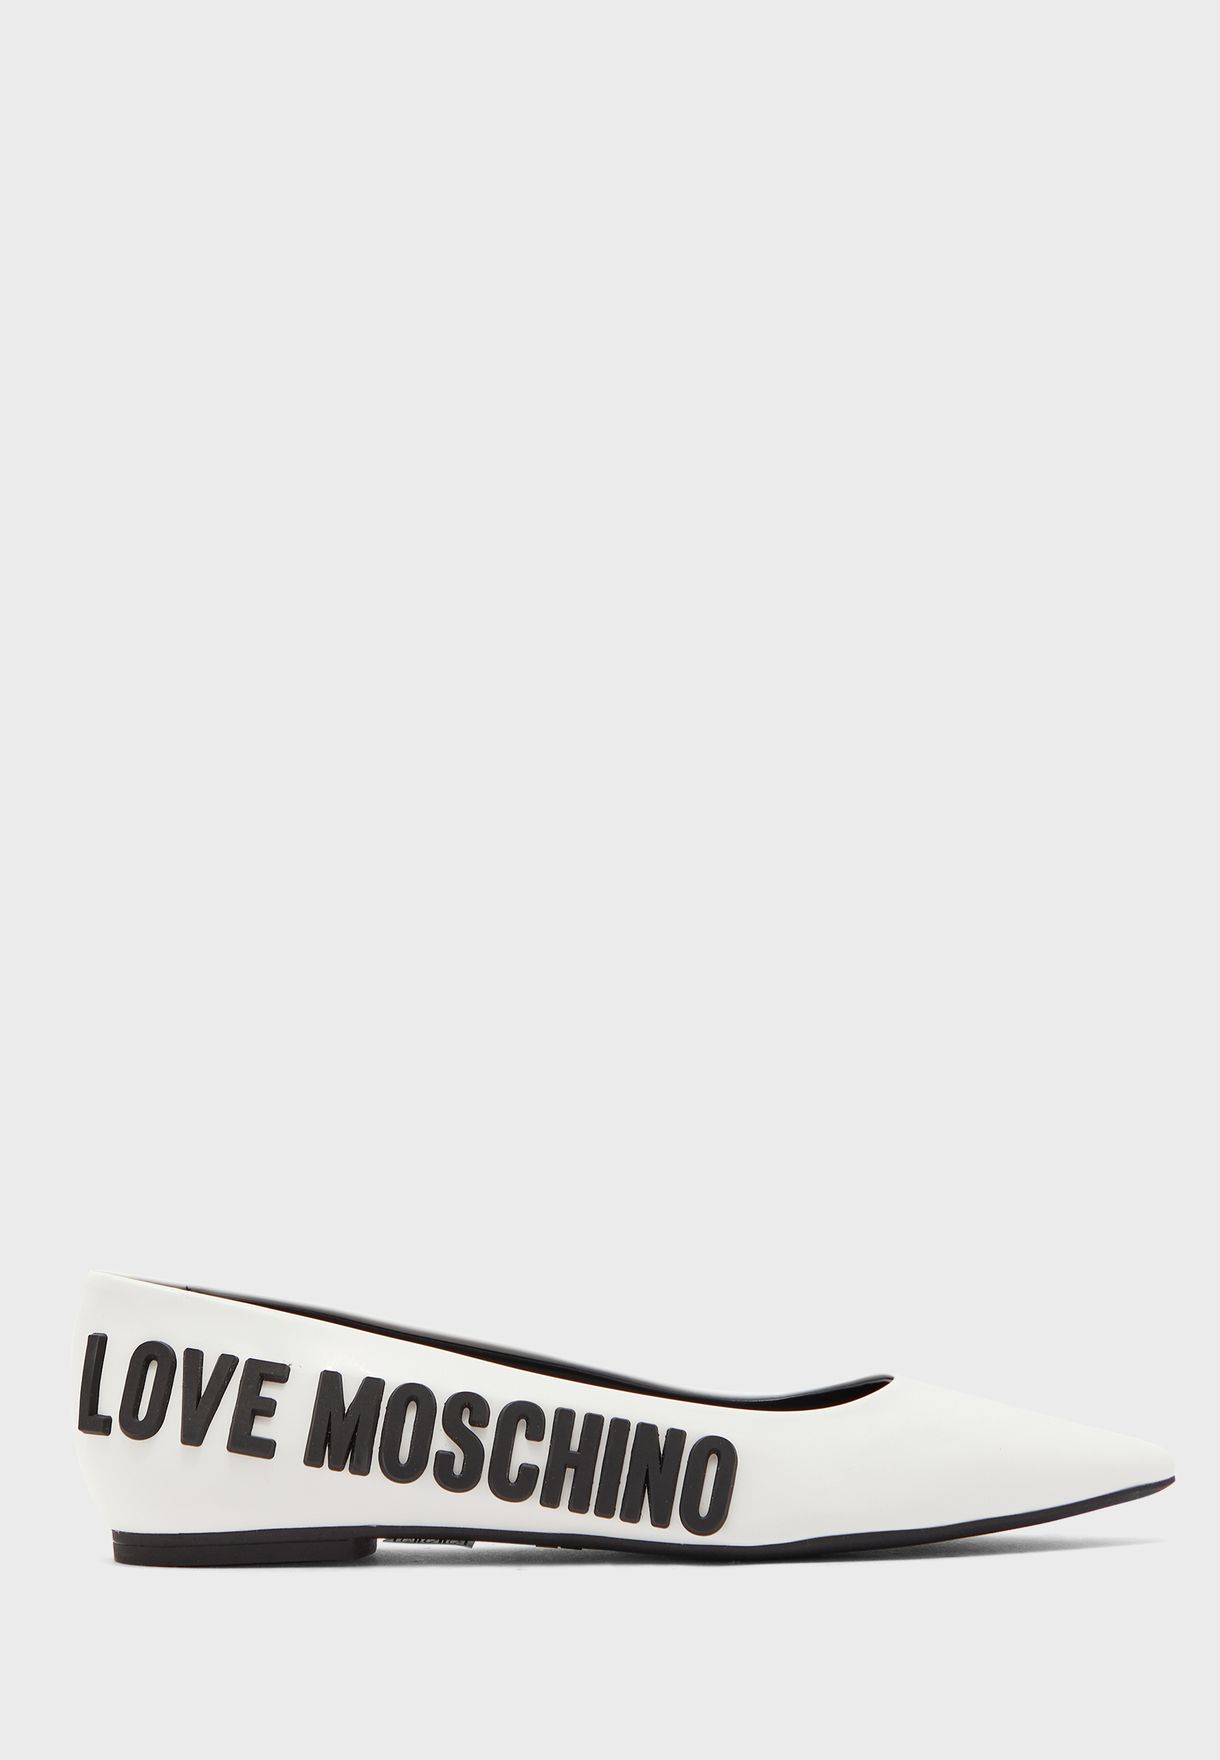 is love moschino a good brand